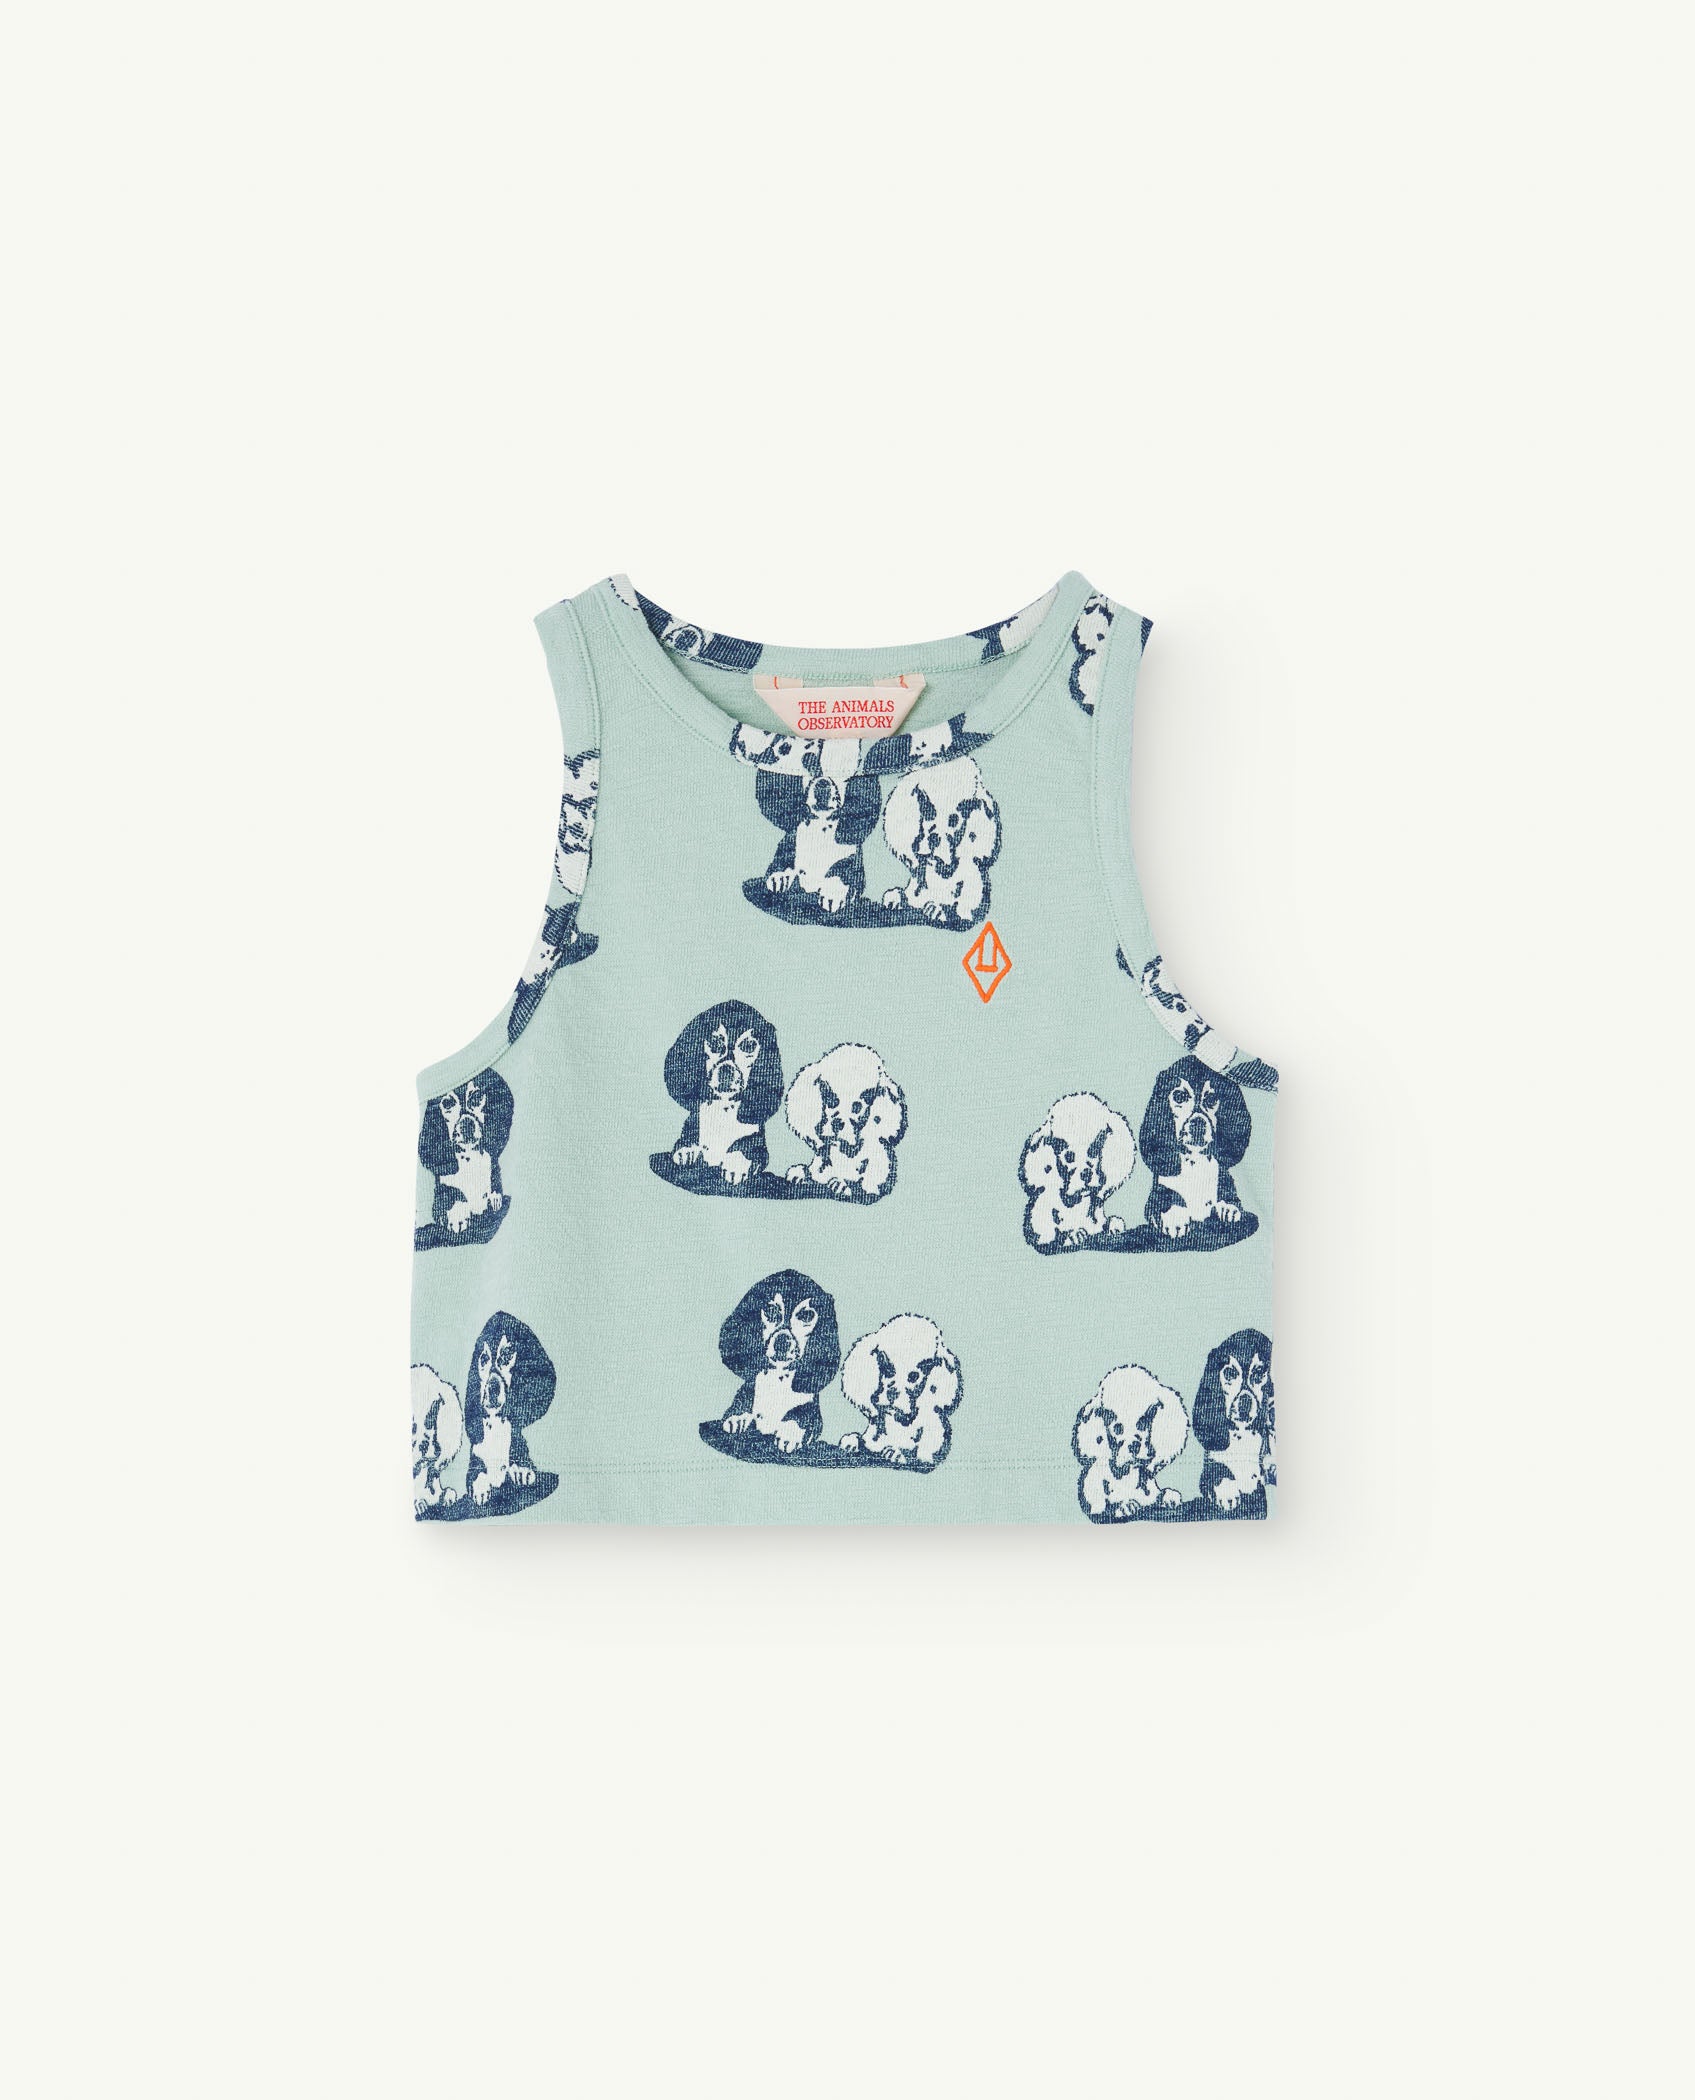 The animals observatory - hyena kids top - turquoise